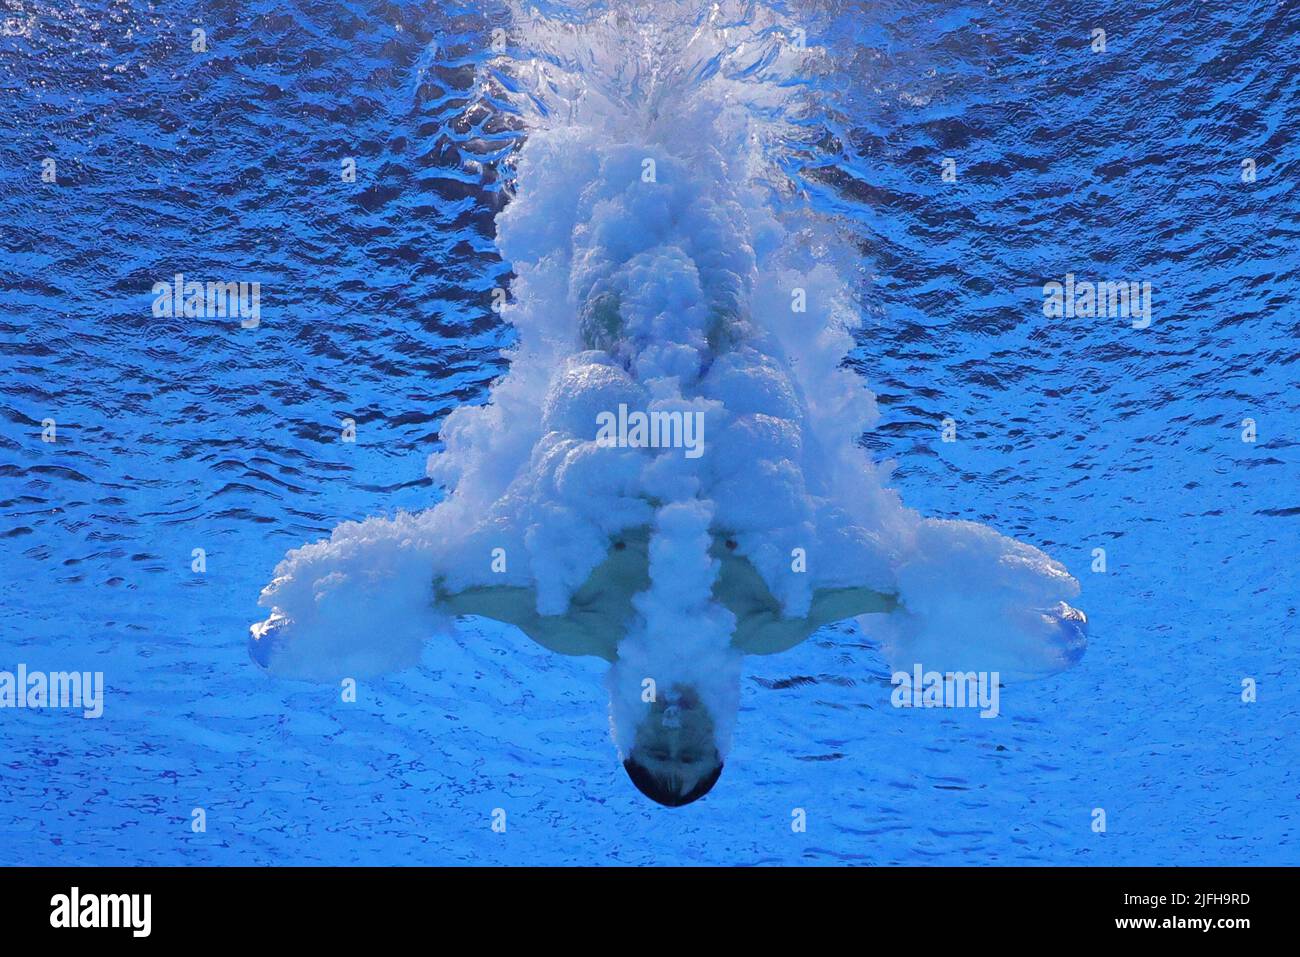 Diving - FINA World Championships - Duna Arena, Budapest, Hungary - July 3, 2022 China's Hao Yang in action during the men's 10m platform final REUTERS/Antonio Bronic Stock Photo